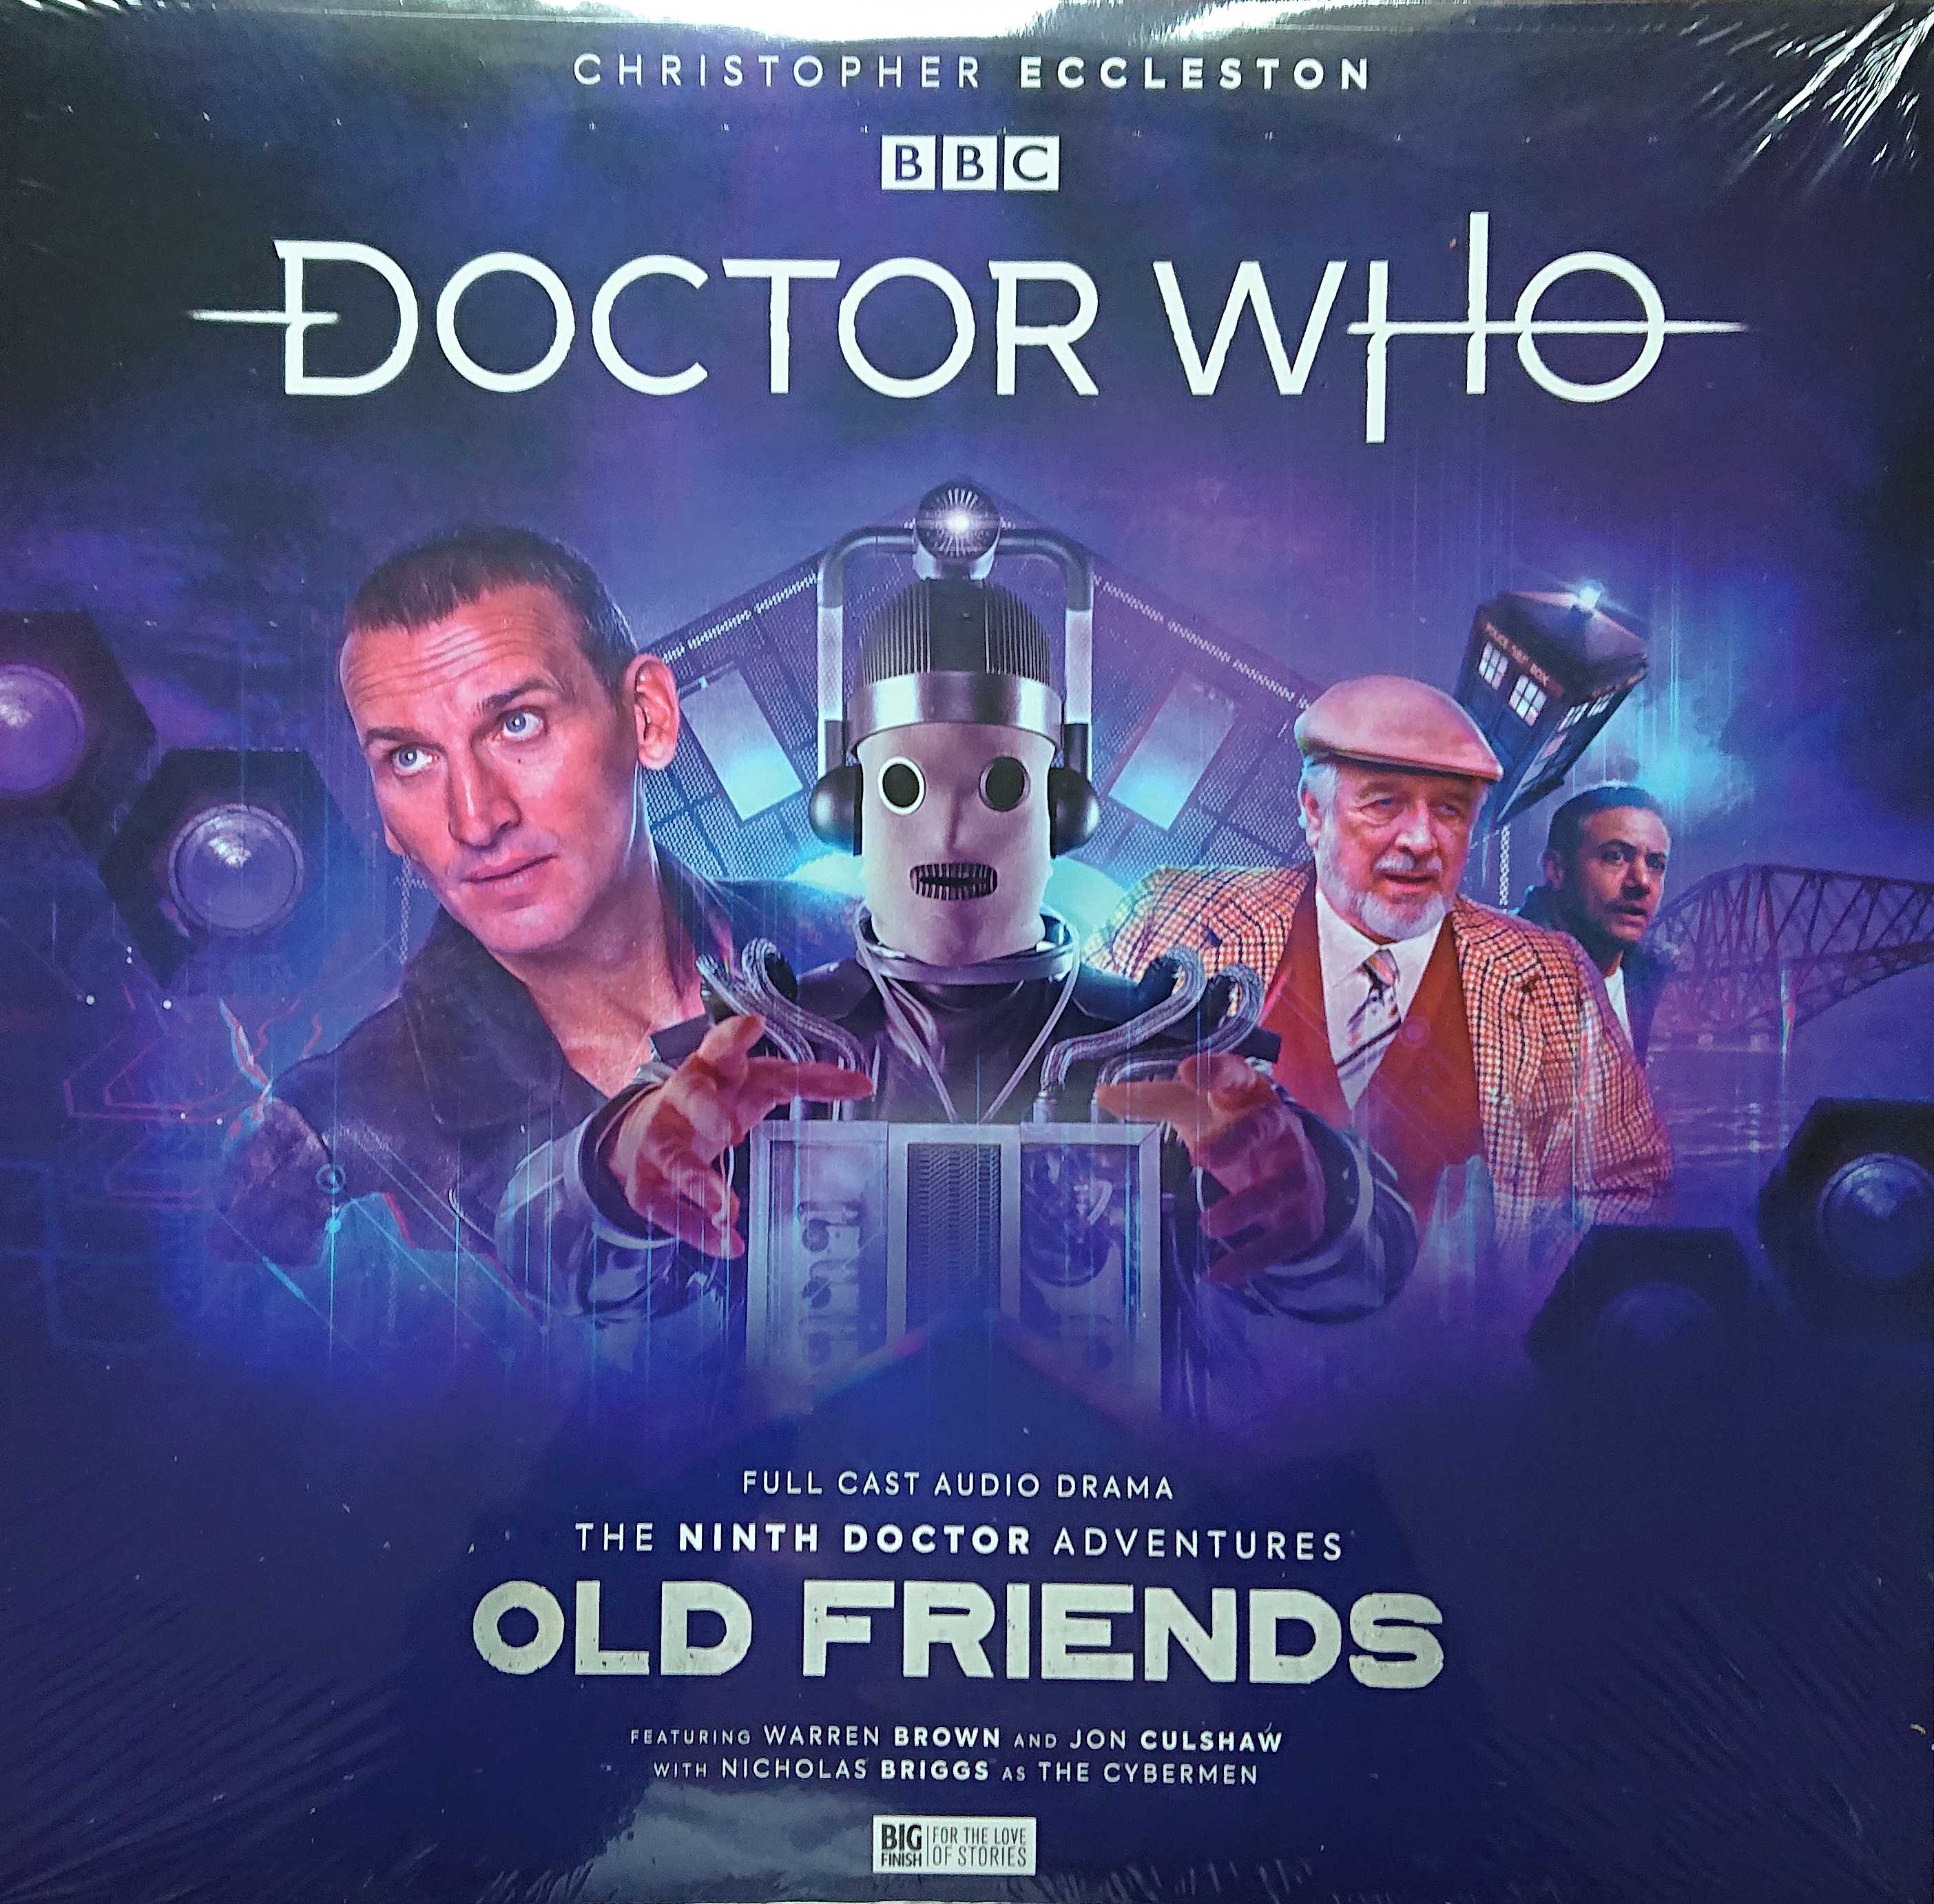 Picture of BFPDW9TH04V Doctor Who - The Ninth Doctor Adventures - Old friends by artist David K Barnes / Roy Gill from the BBC records and Tapes library